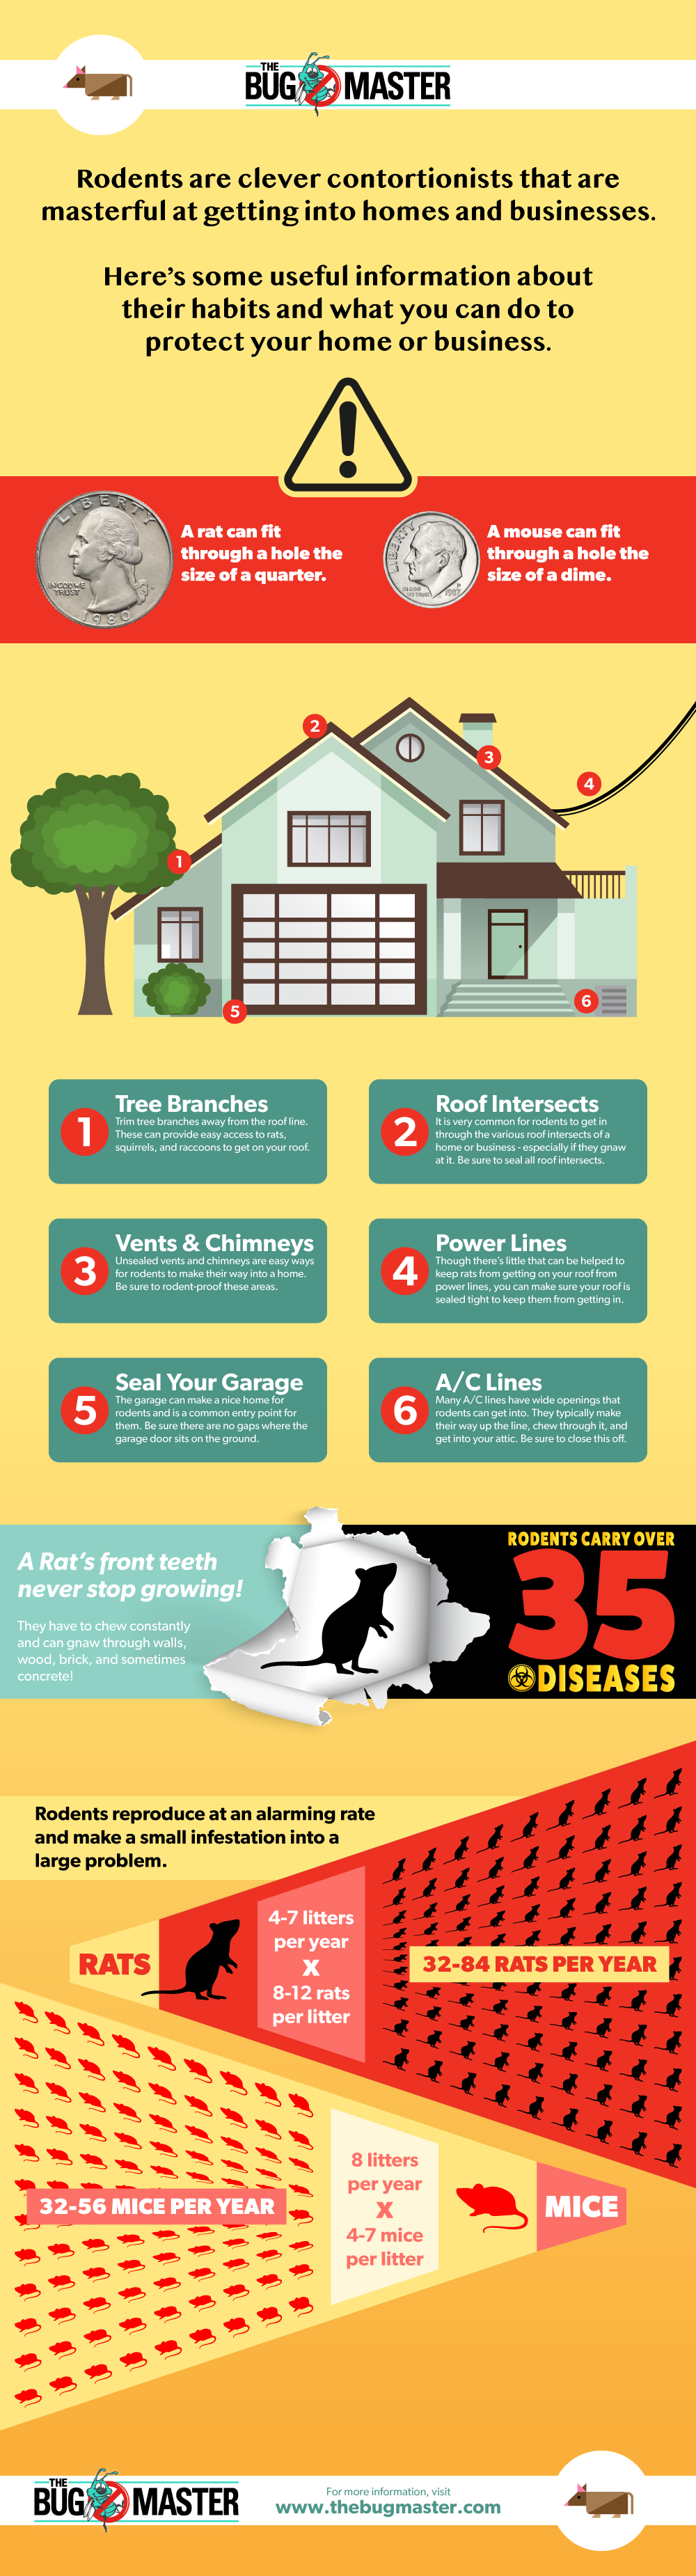 How To Keep Rodents Out Of Your Home Infographic